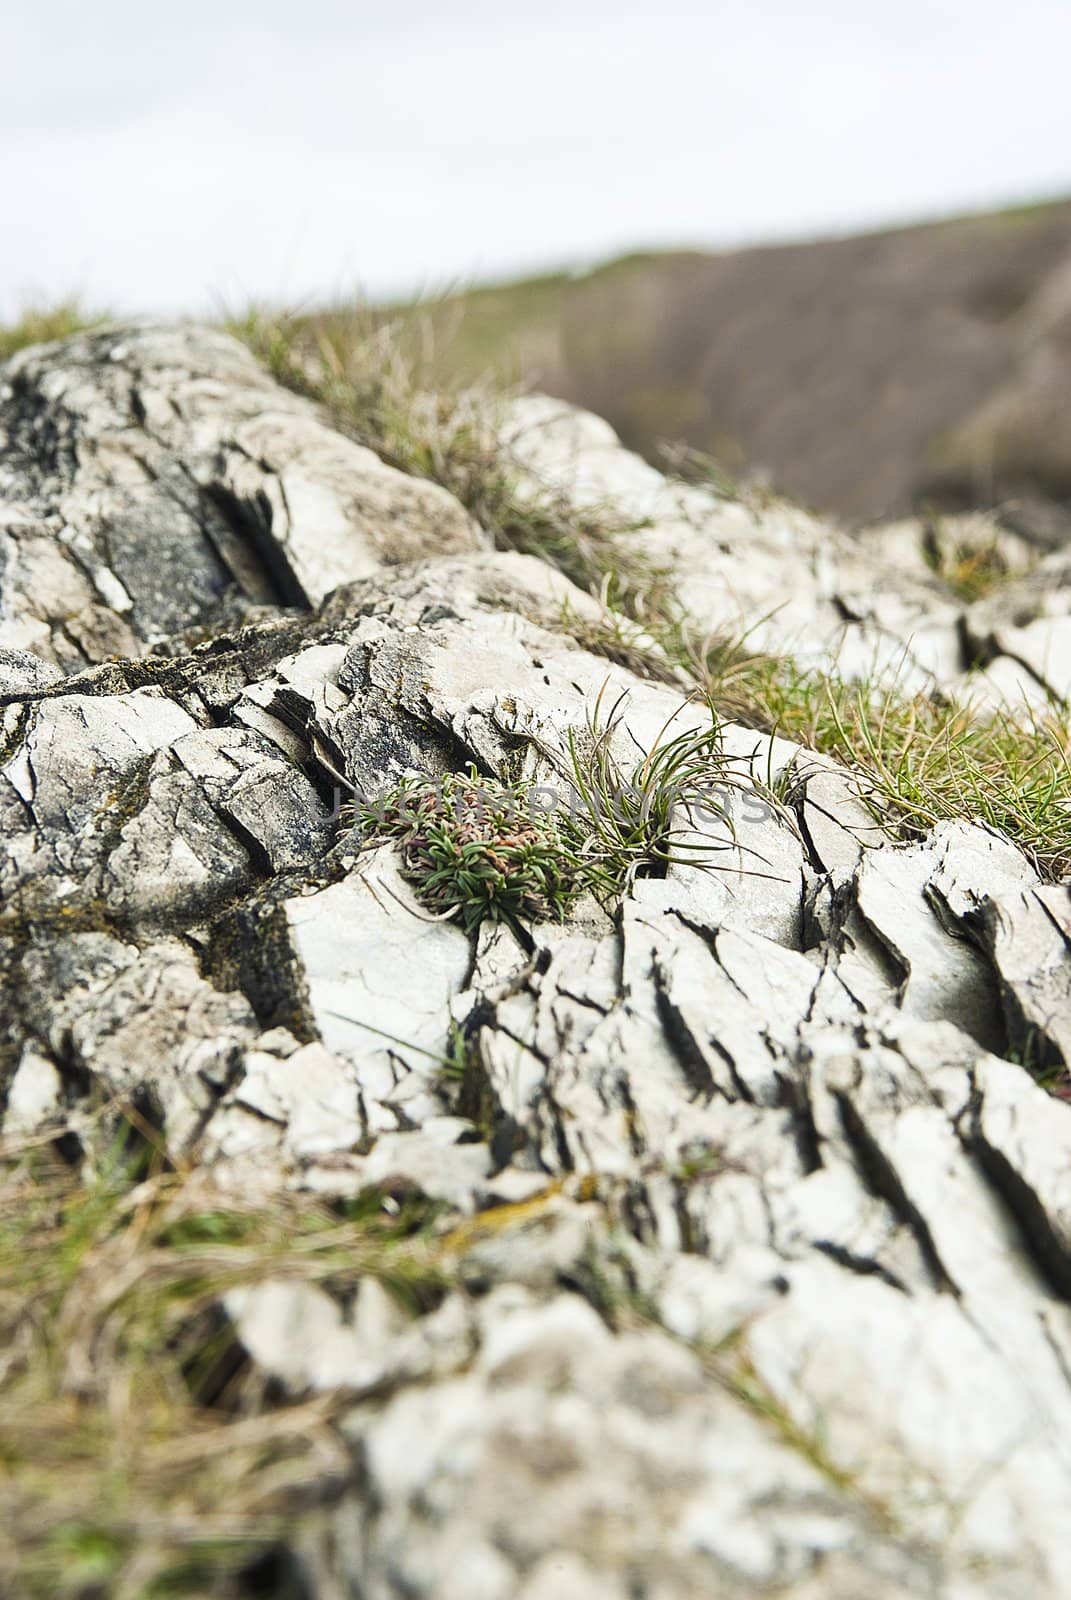 rugged rocks covered in grass  on fistral beach, newquay, cornwall, uk